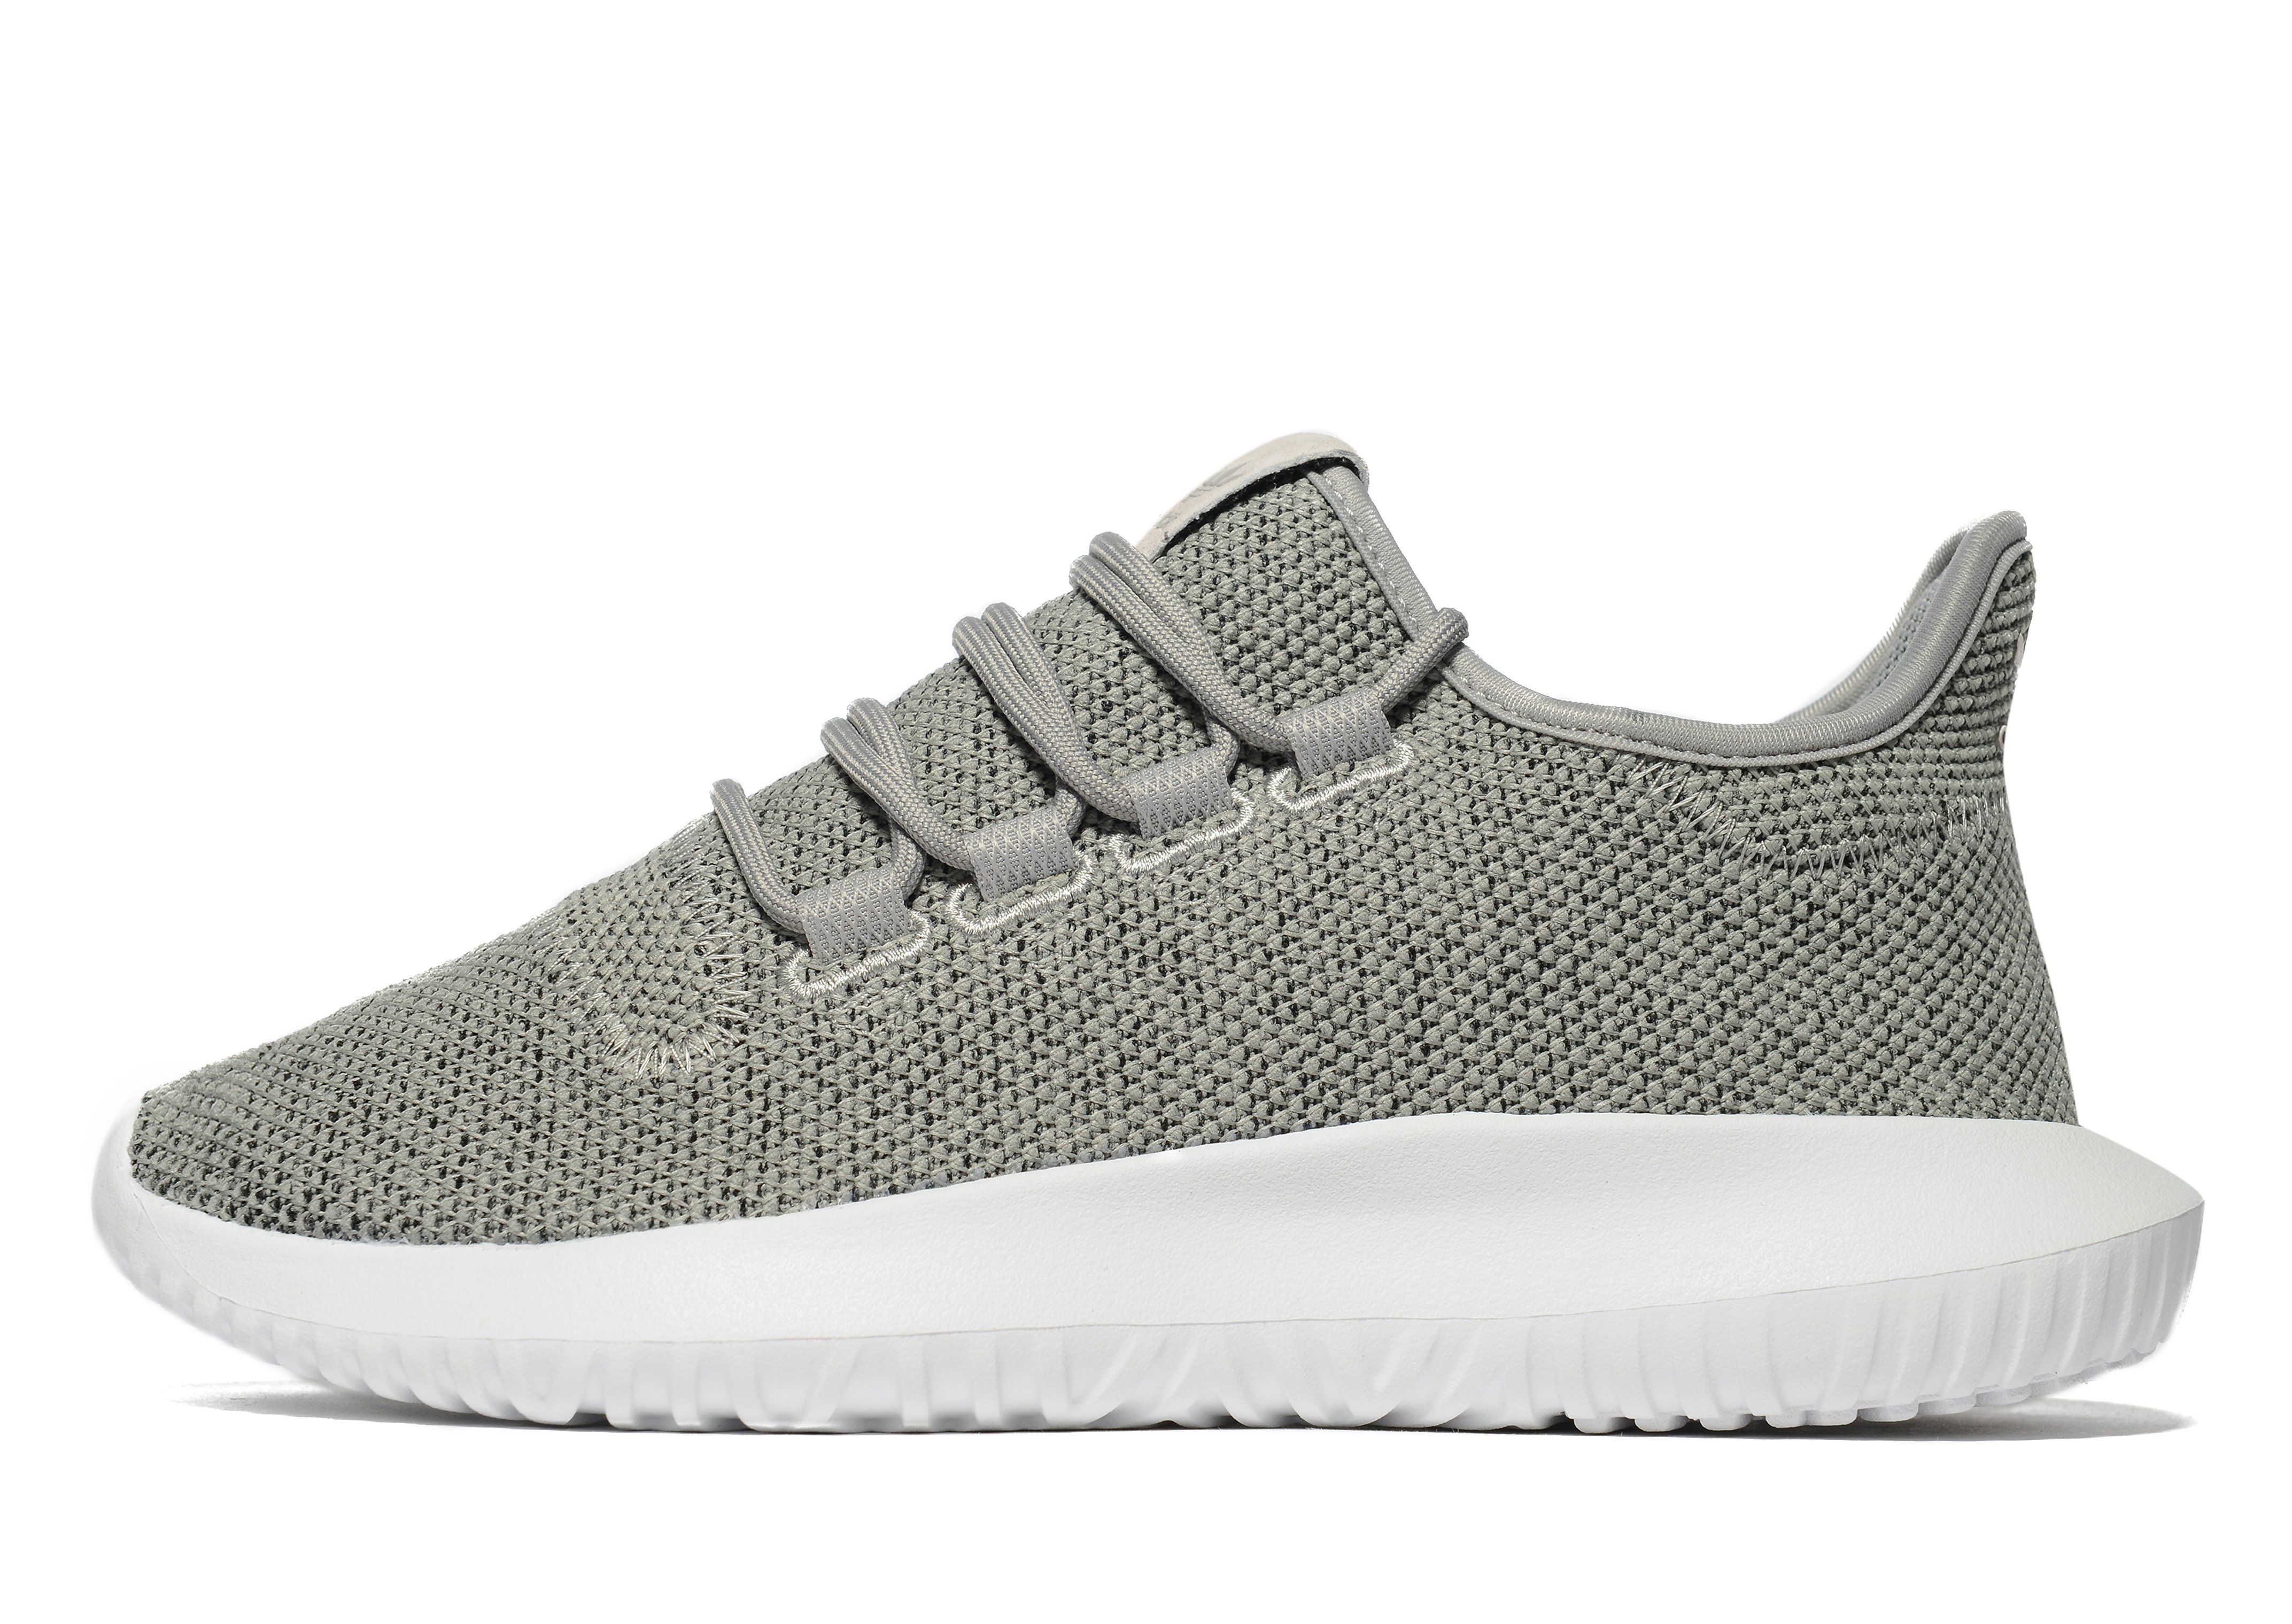 This Tubular Primeknit Will Be a London Exclusive Release